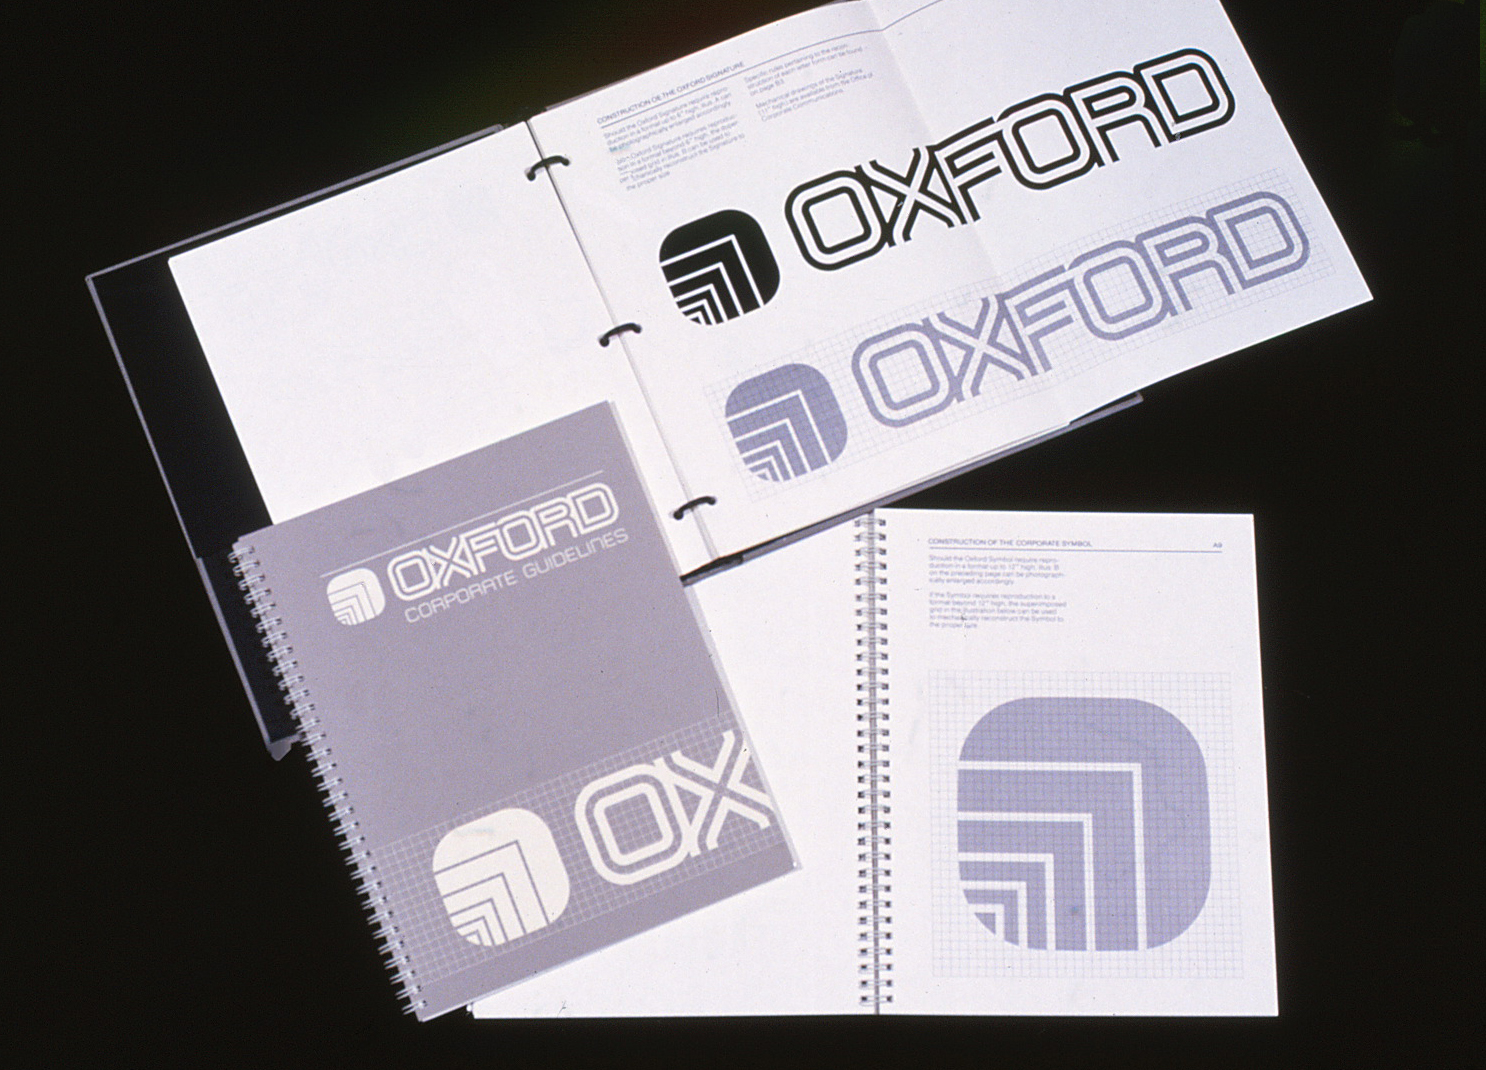 The Oxford Graphic Standards Manual shown indifferent layouts, opened and closed.